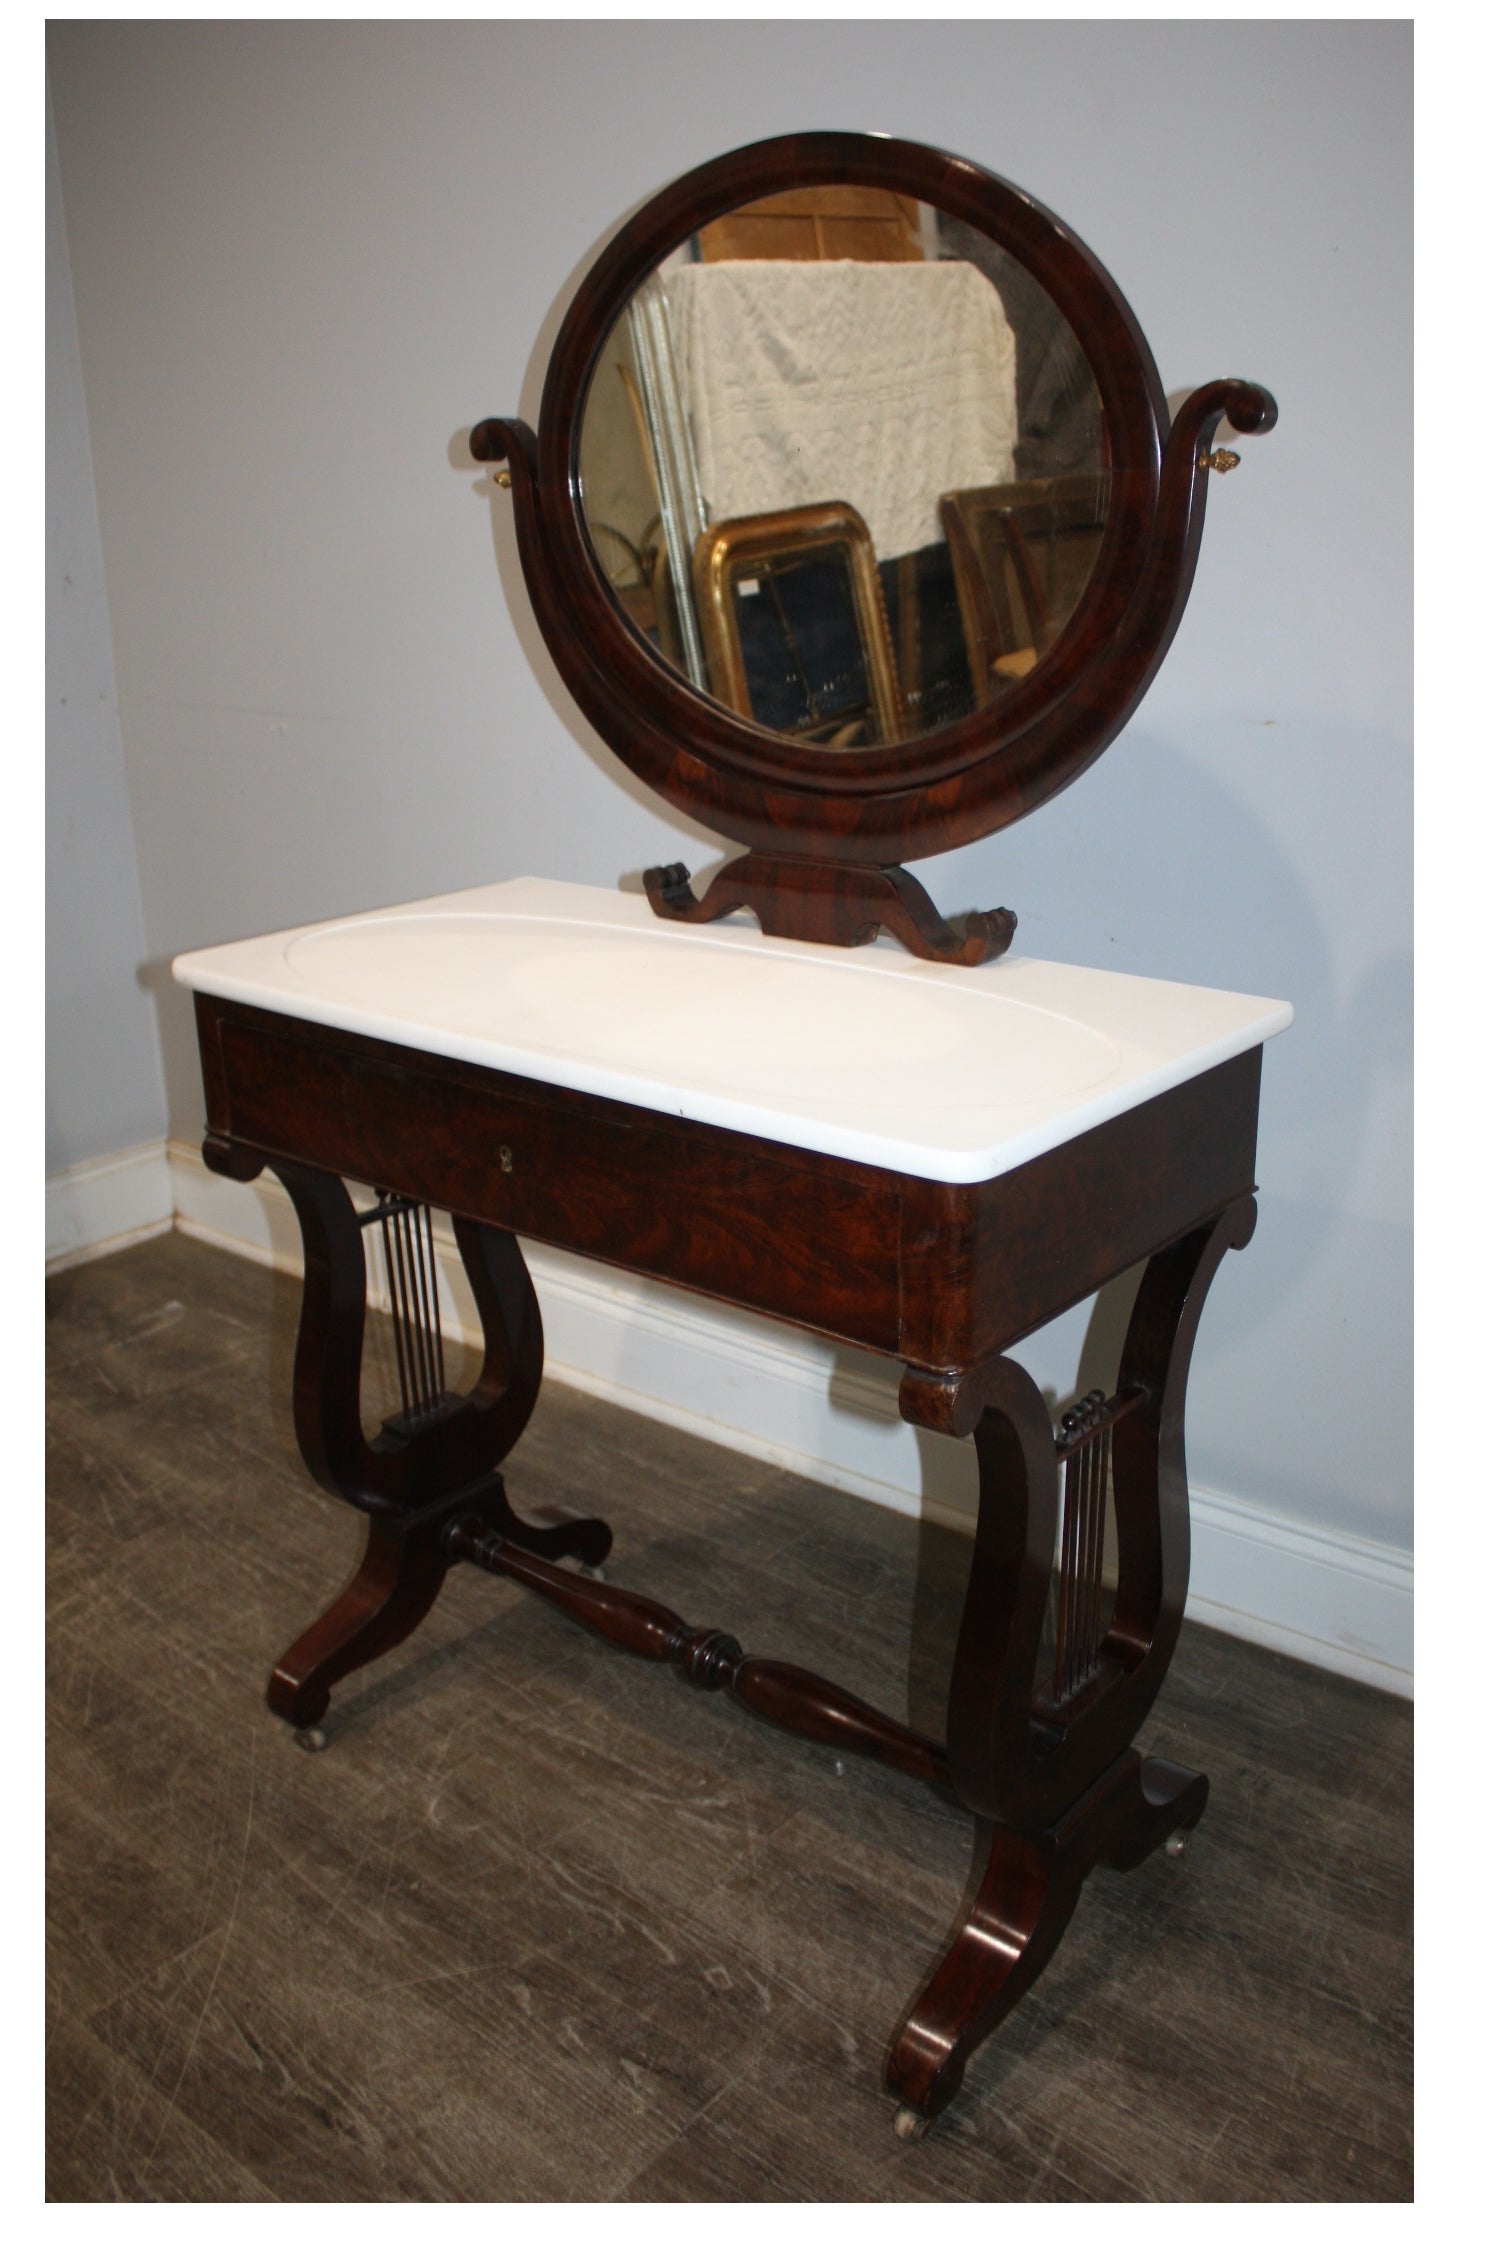 French Early 19th Century Vanity In Good Condition For Sale In Stockbridge, GA